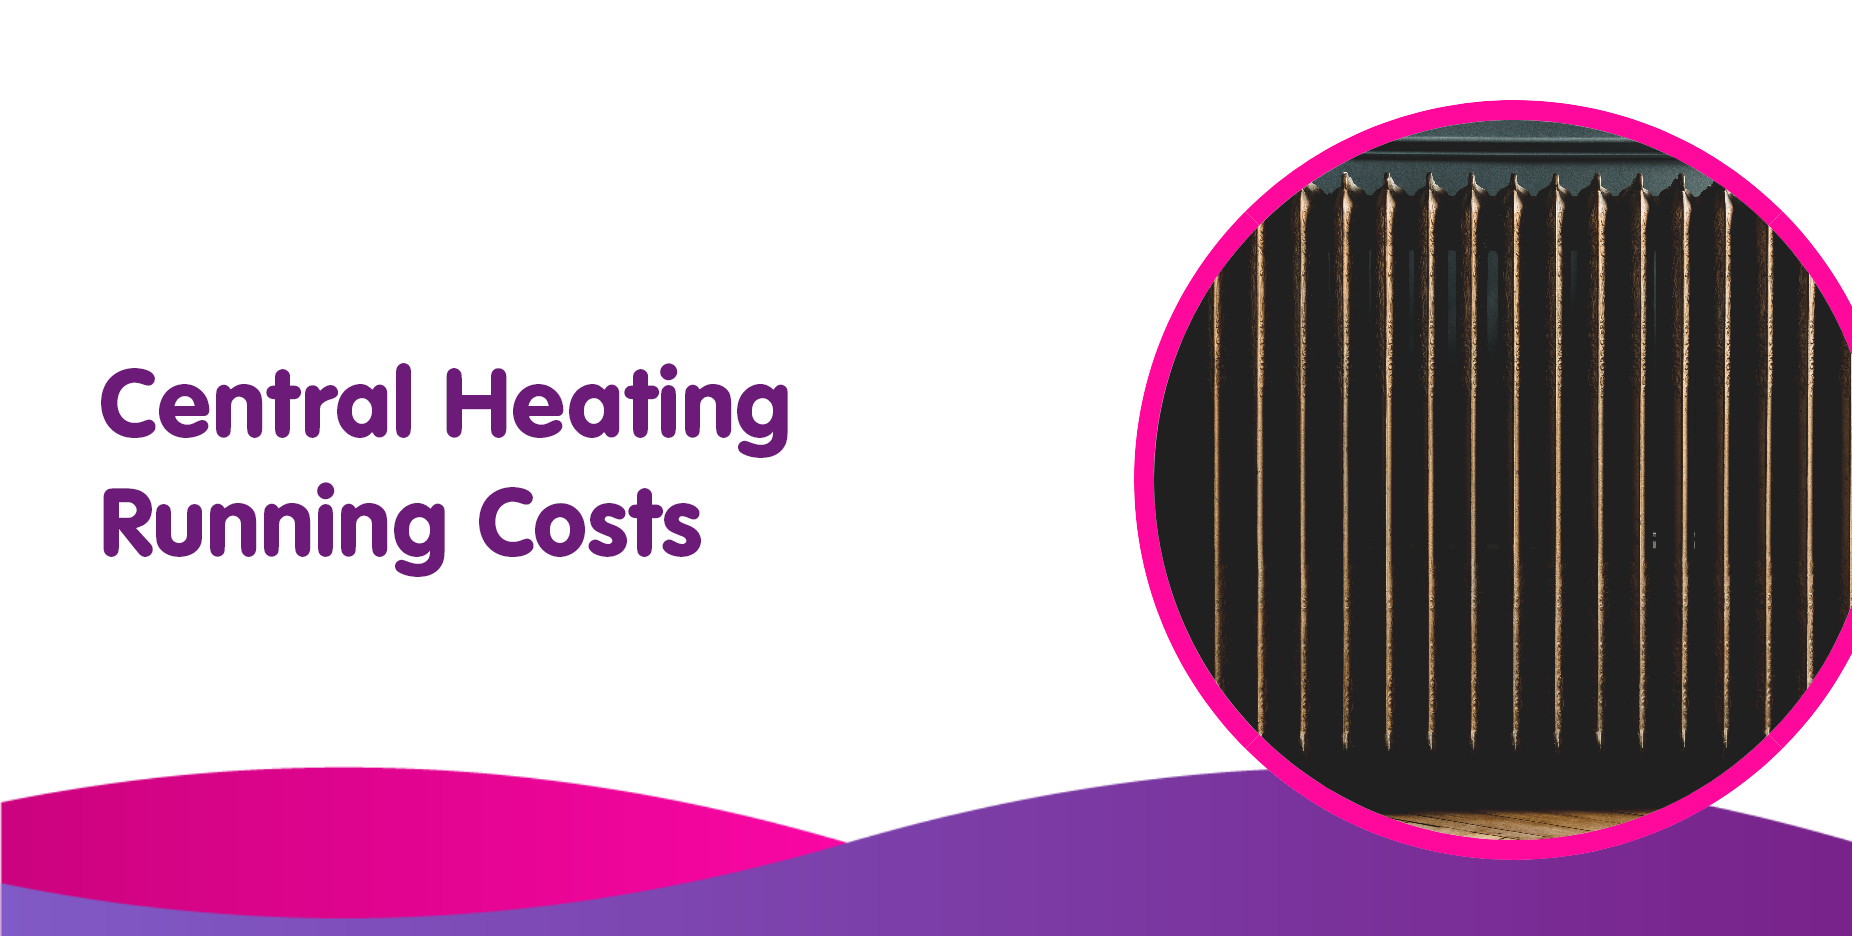 Central Heating Running Costs